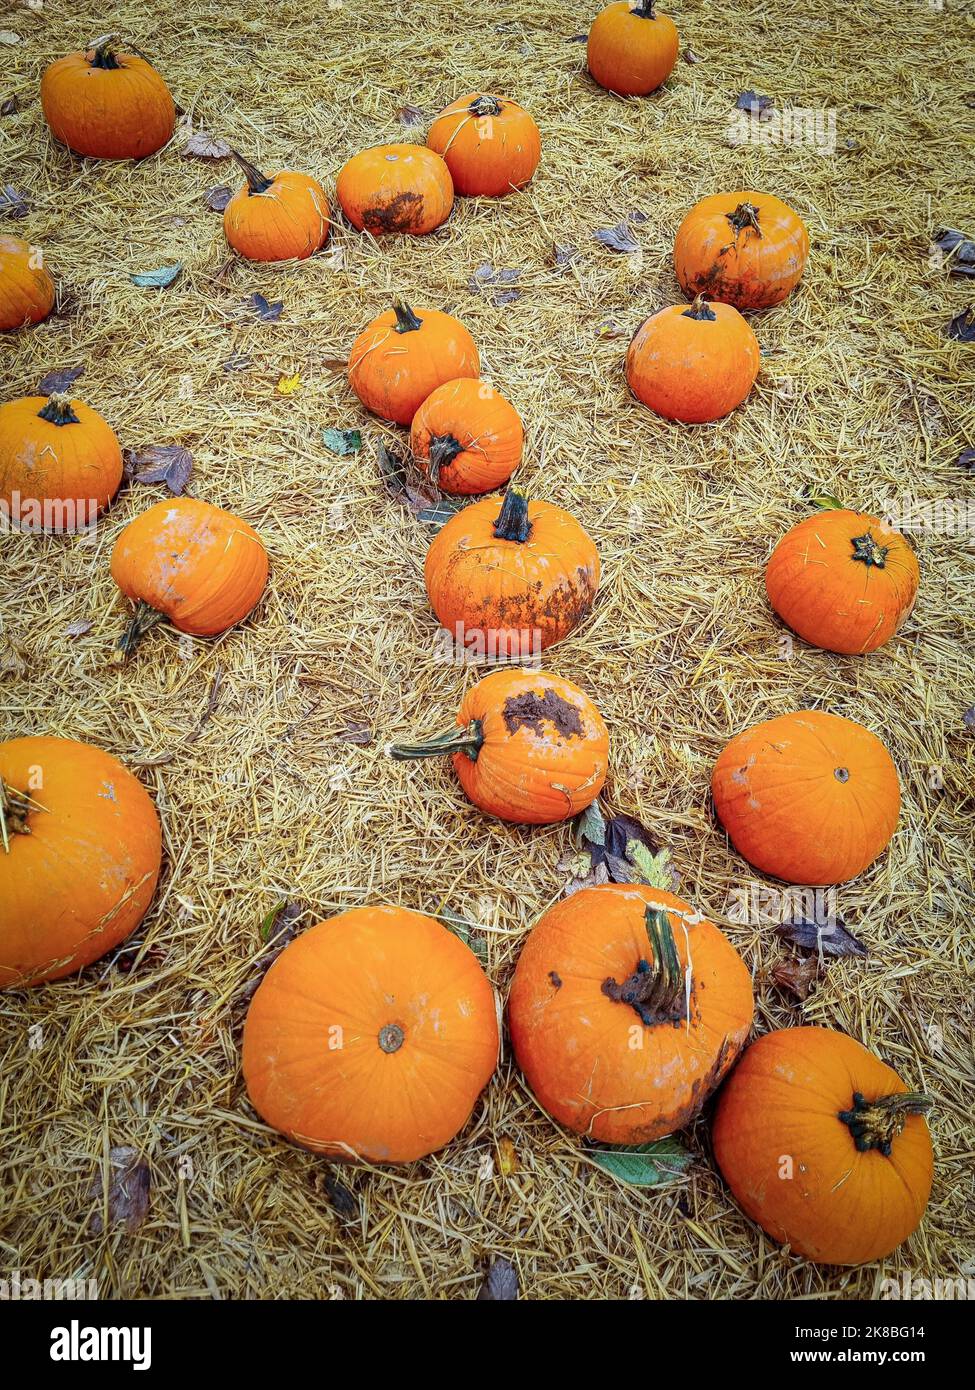 Pumpkins on hay, at a pick your own pumpkins farm Stock Photo